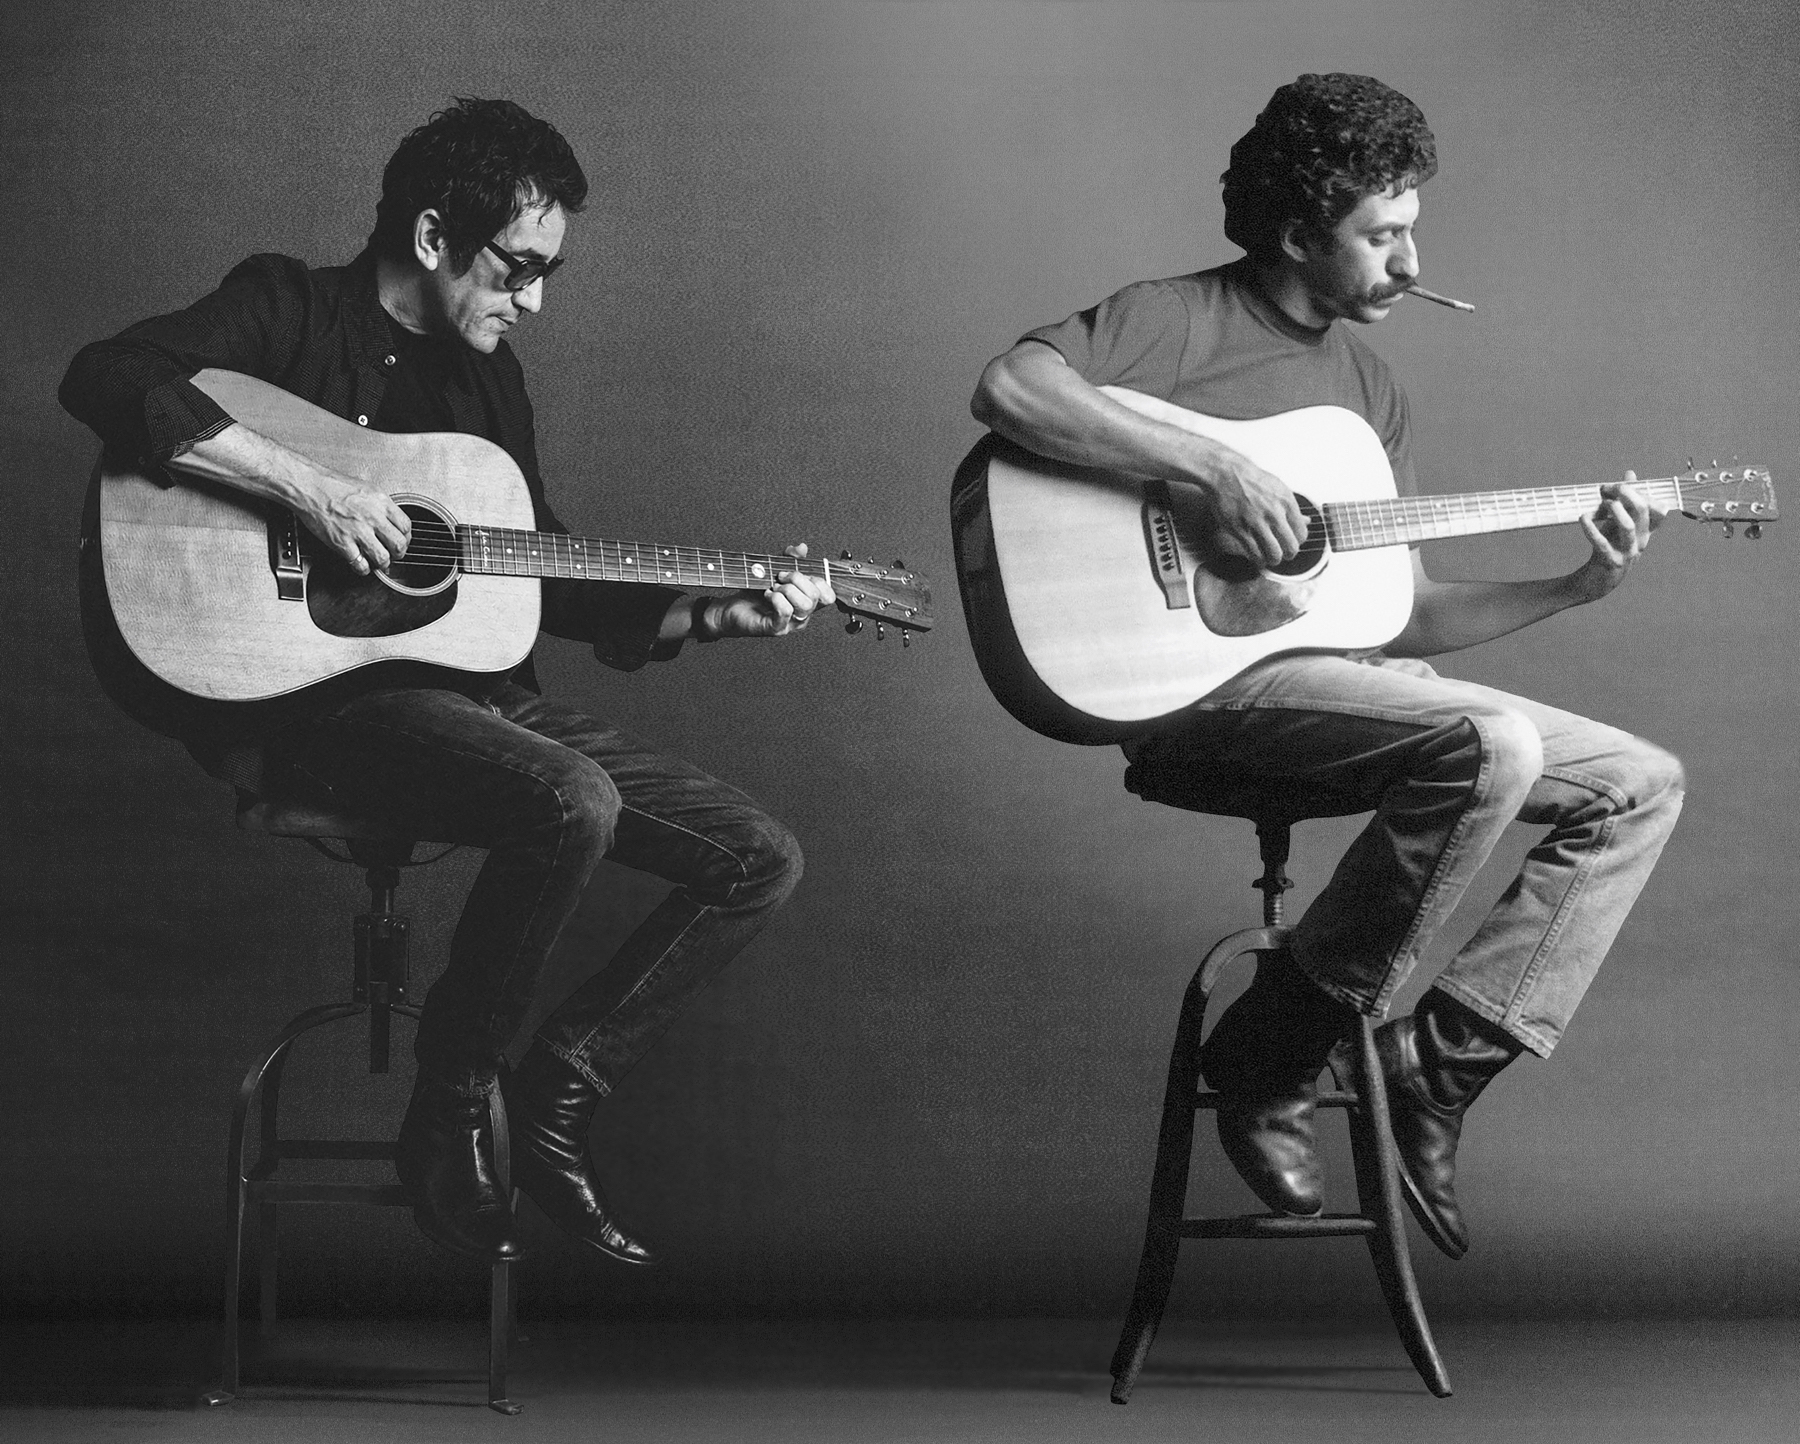 Black and white photo montage of A.J. and Jim Croce playing guitars